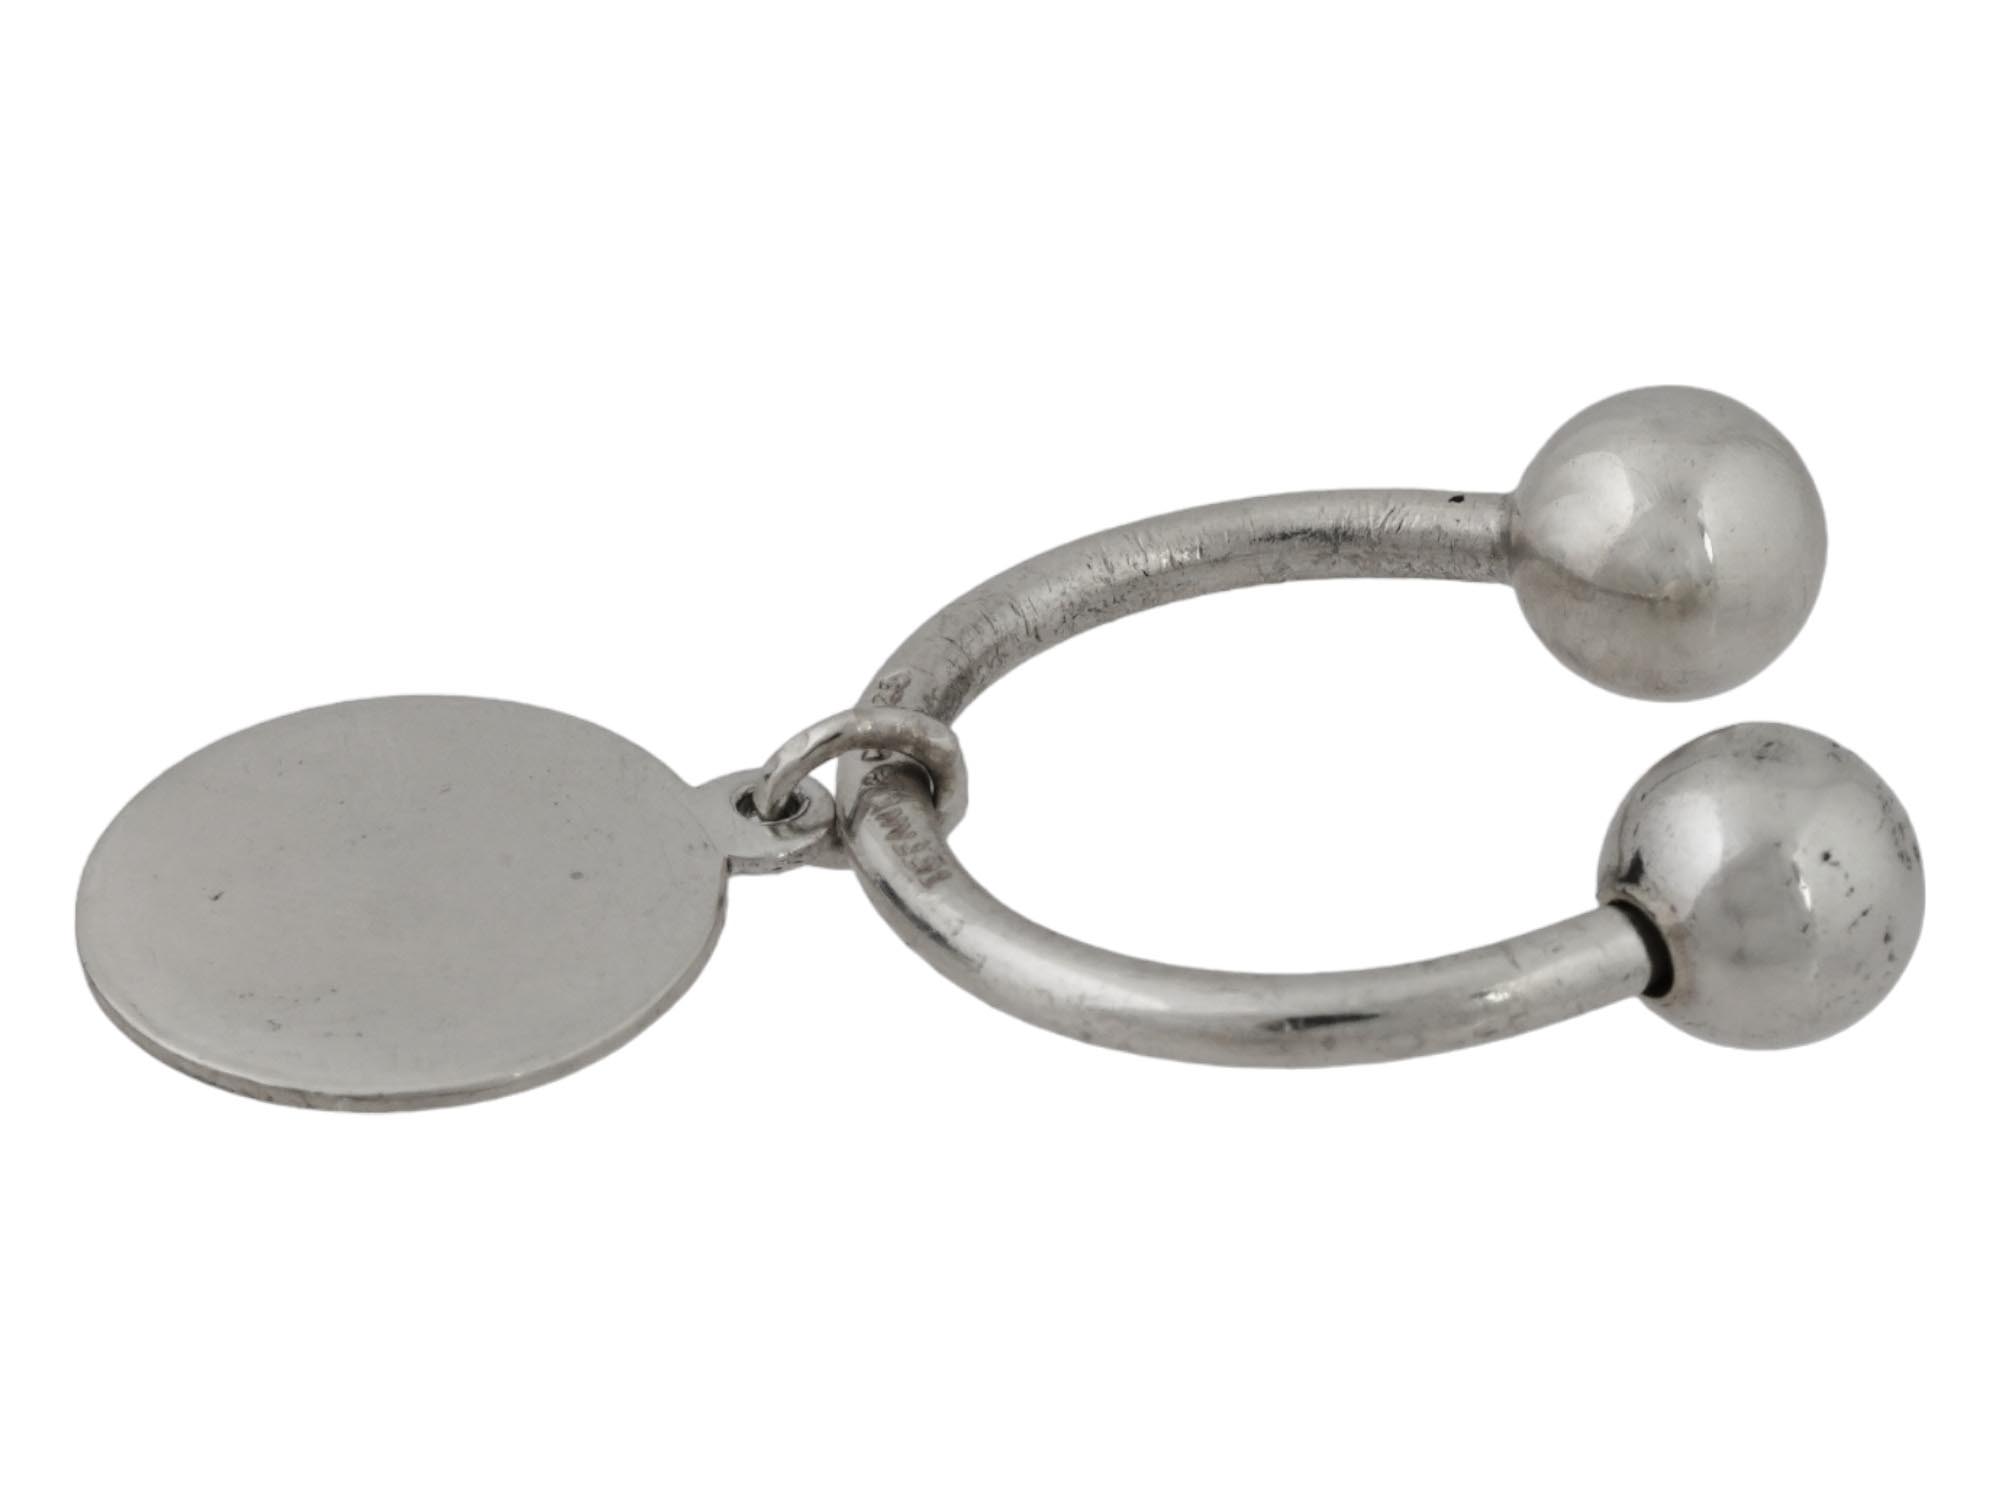 TIFFANY AND CO STERLING SILVER SCREWBALL KEY RING PIC-2